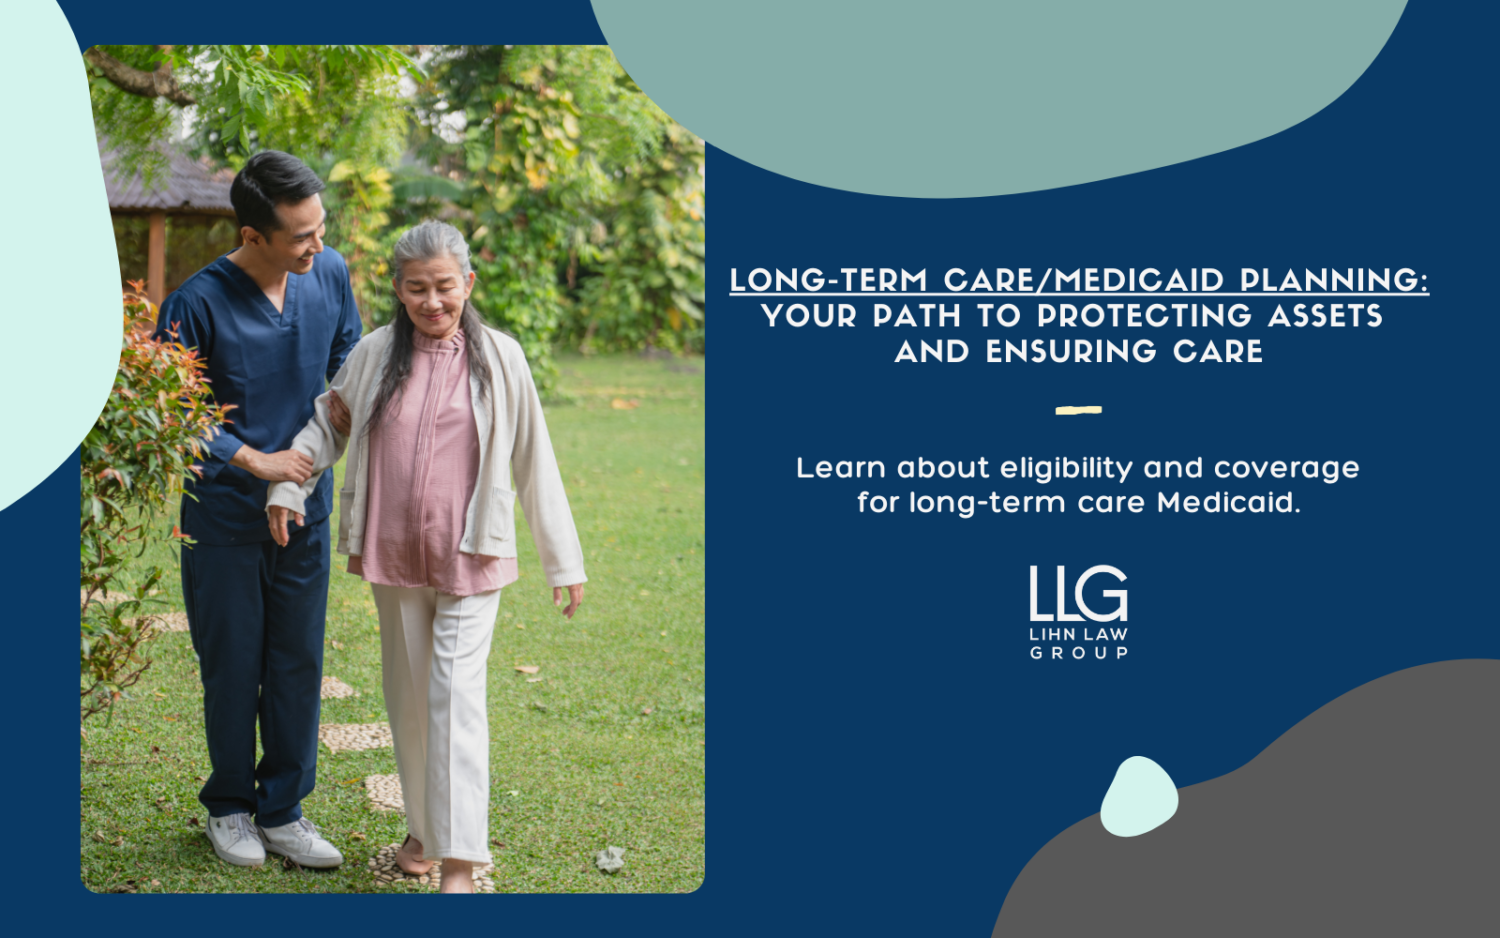 Long-Term Care/Medicaid Planning: Your Path to Protecting Assets and Ensuring Care